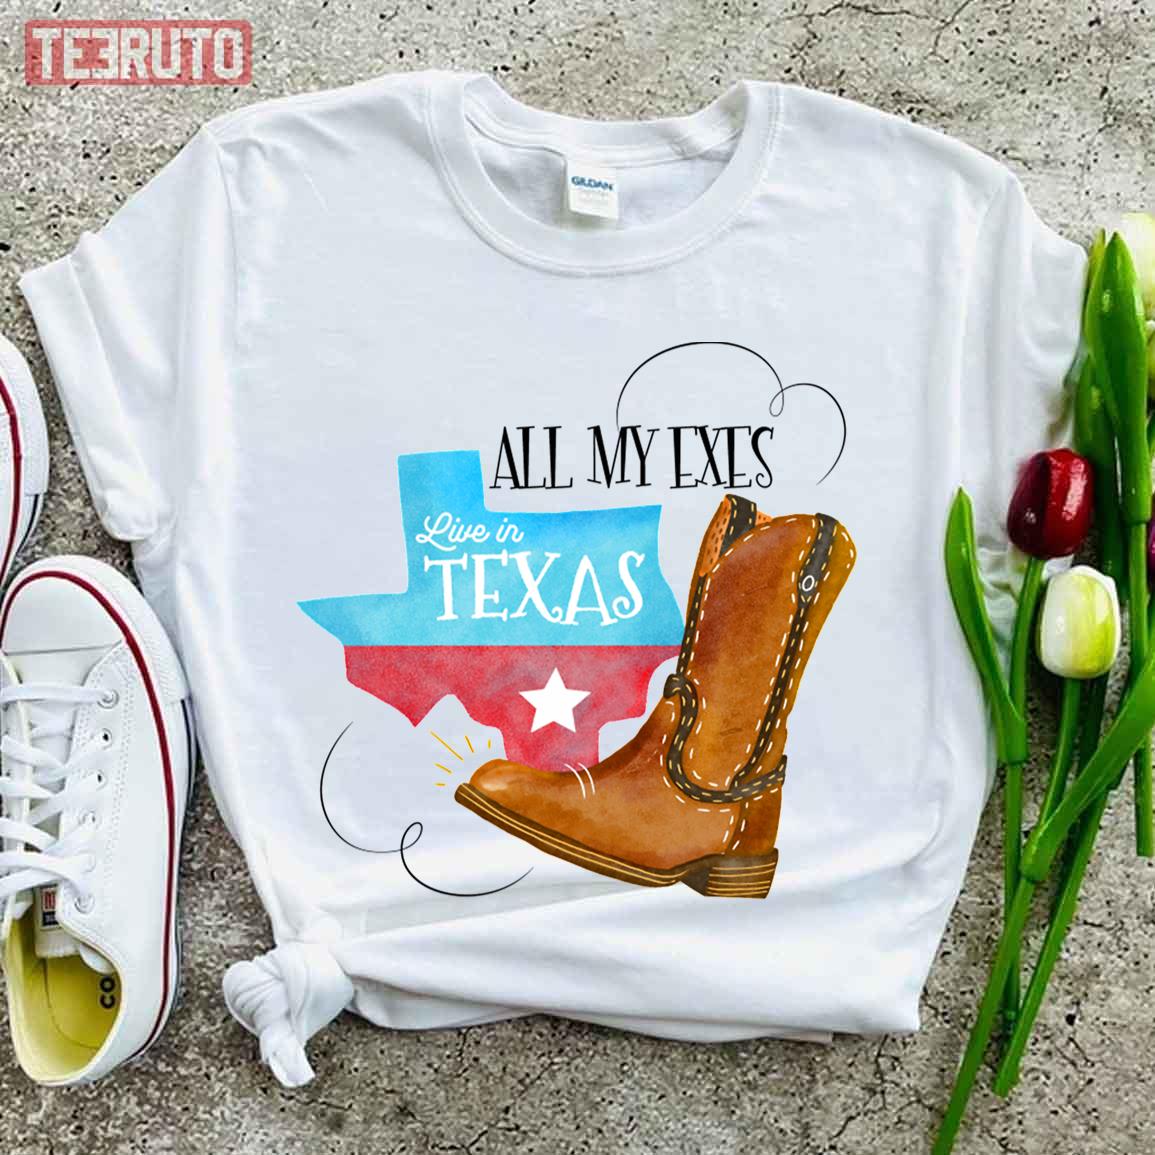 All My Exes Live In Texas Unisex T-Shirt